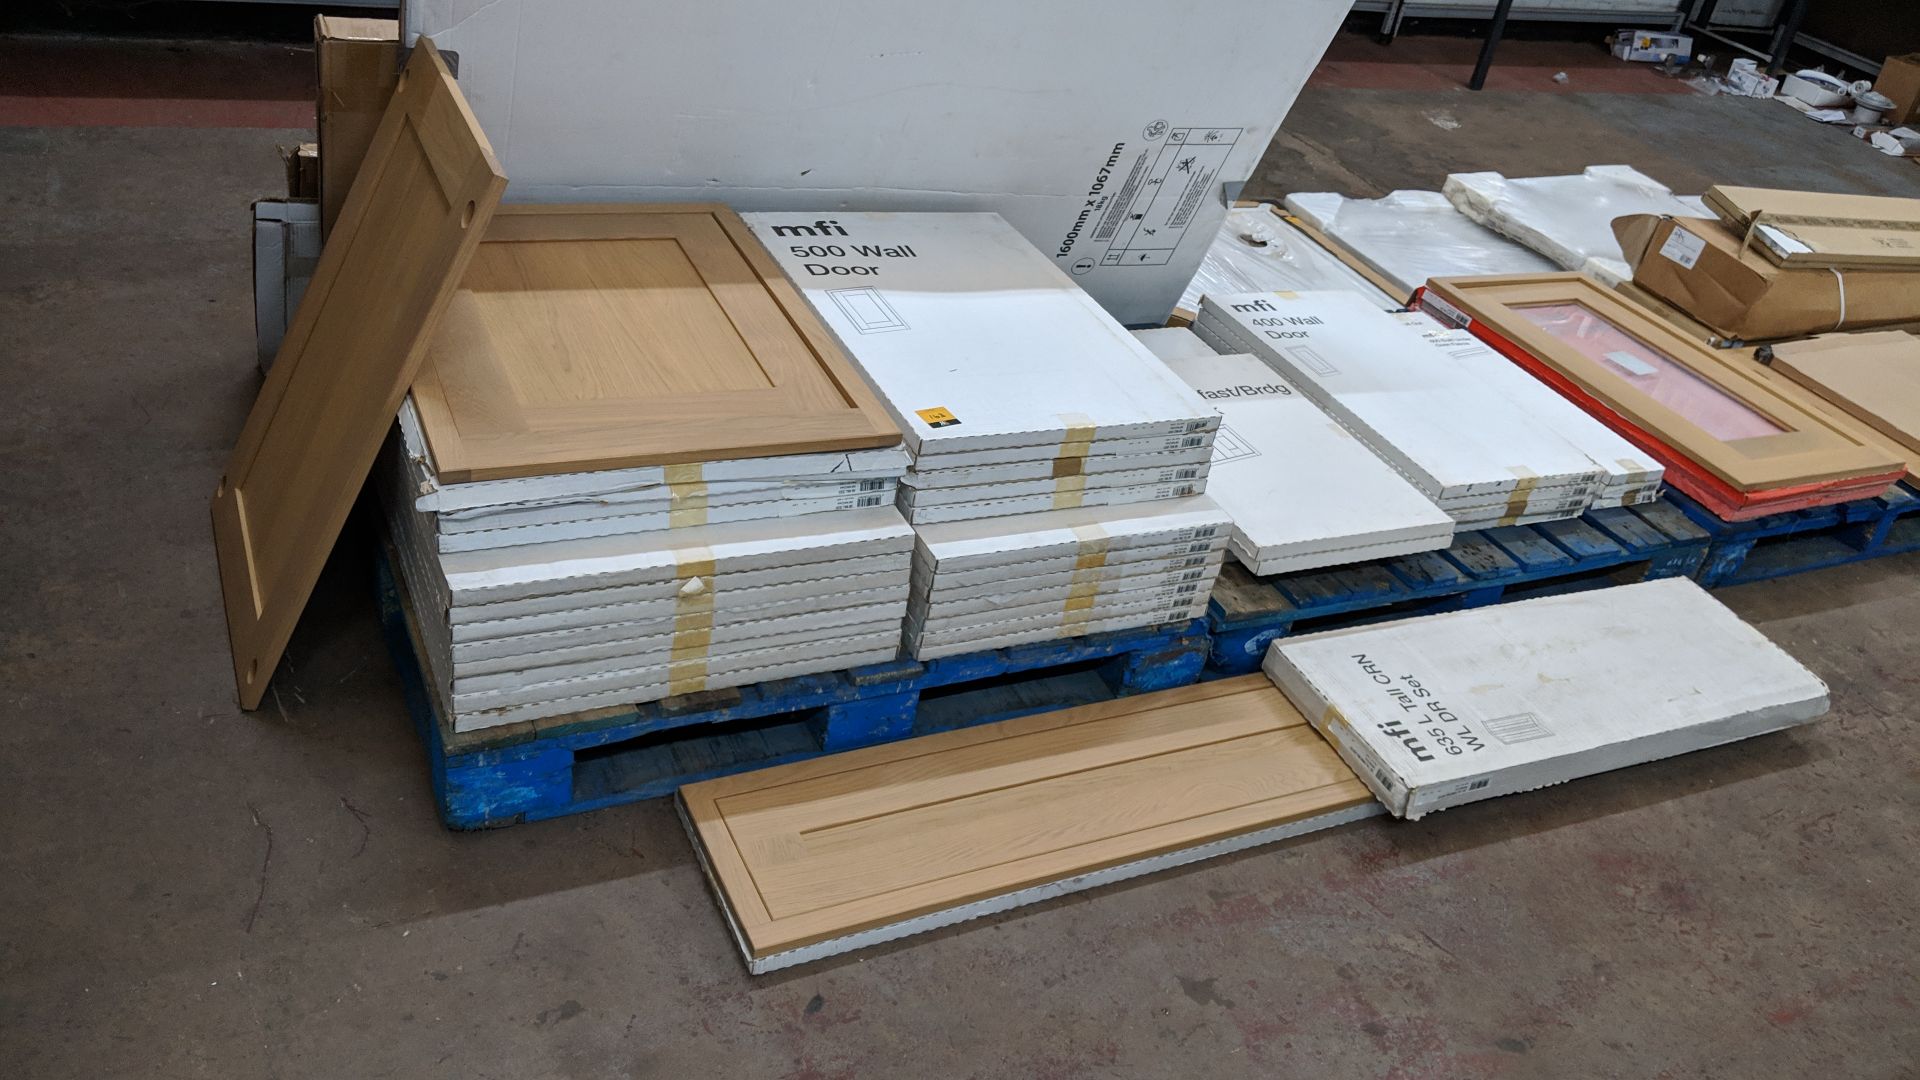 Large quantity of MFI doors & other items comprising the contents of 2 pallets plus the stack of